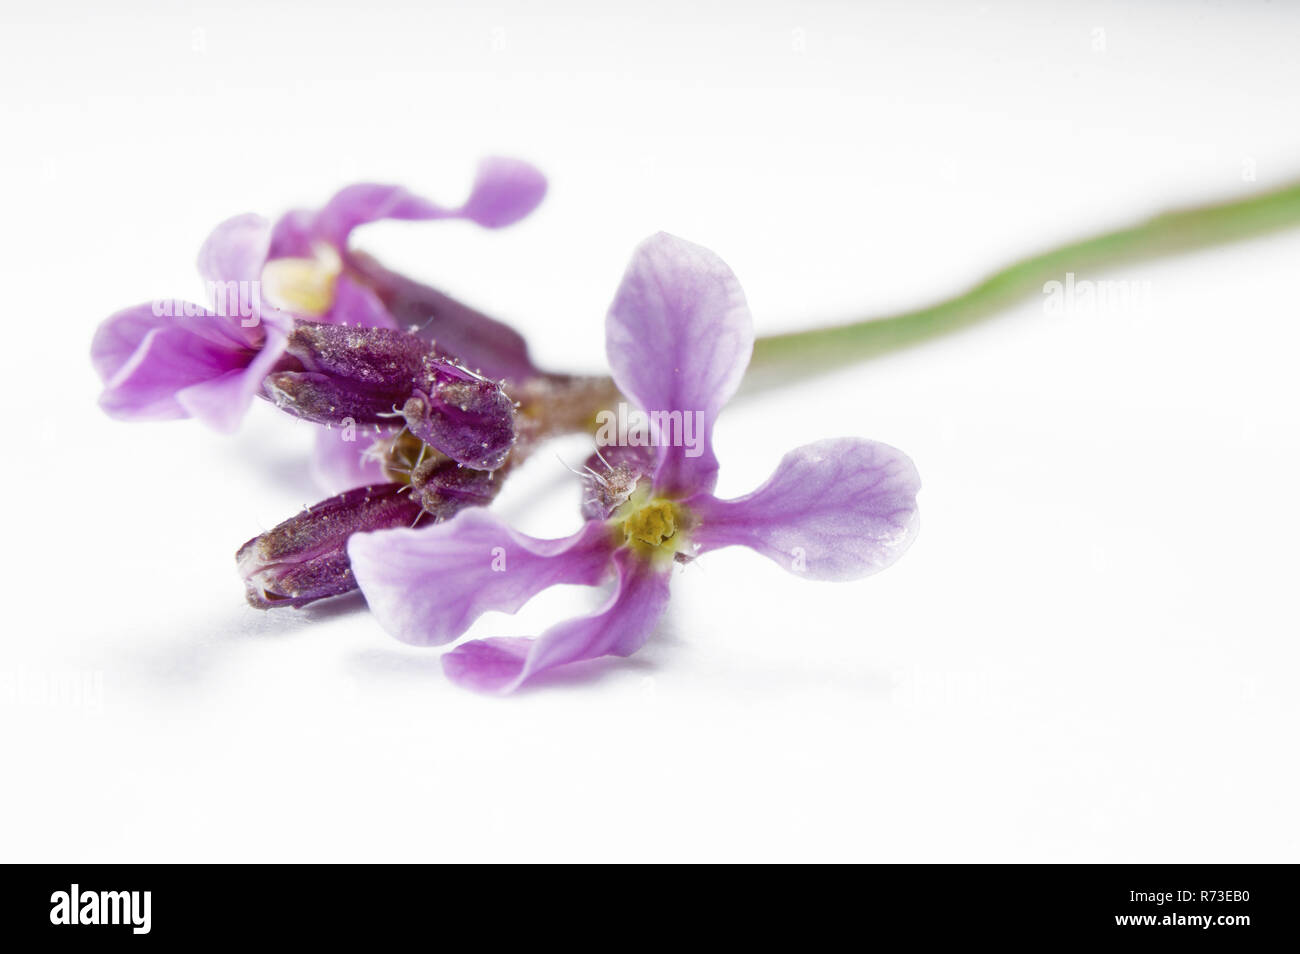 Two purple wildflowers, the african mustard, on a white background. Stock Photo